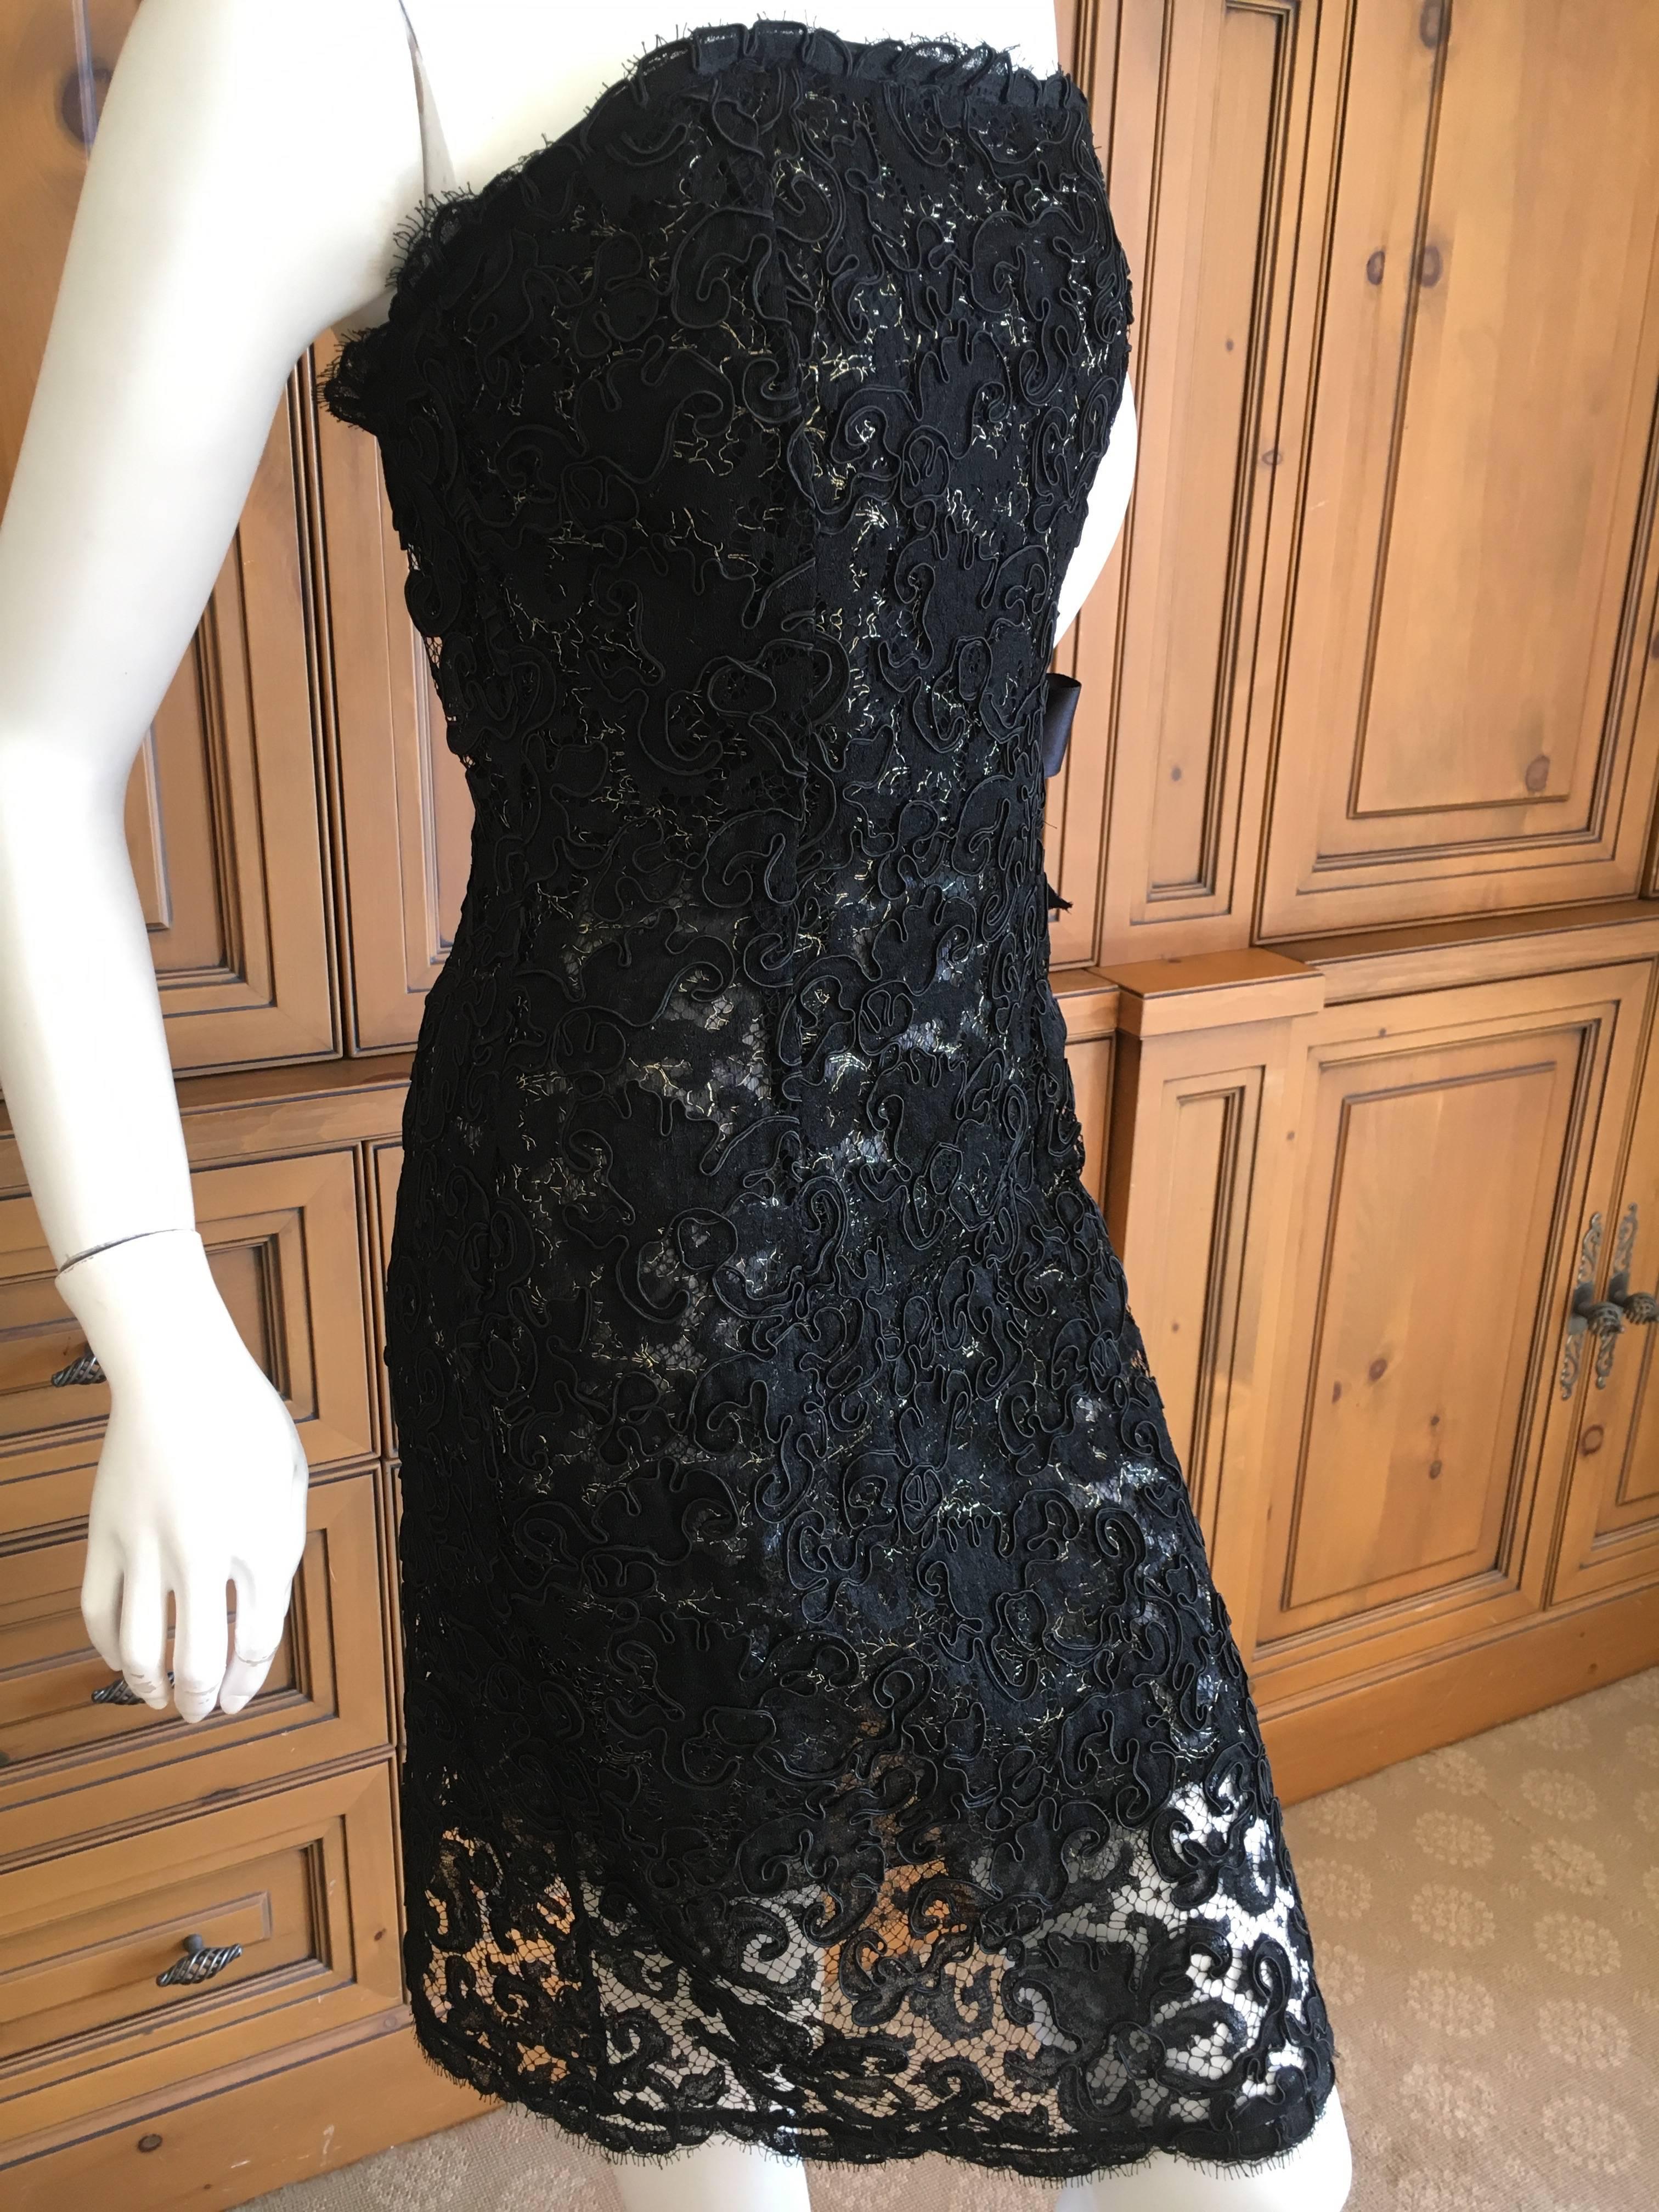 Beautiful double layer lace wrap dress with three bow's on the side from Yves Saint Laurent Rive Gauche.
The first layer of lace is gold edged black lace, with black lace overlay.
Here is boning in the dress.
Hard to photograph, but stunning in